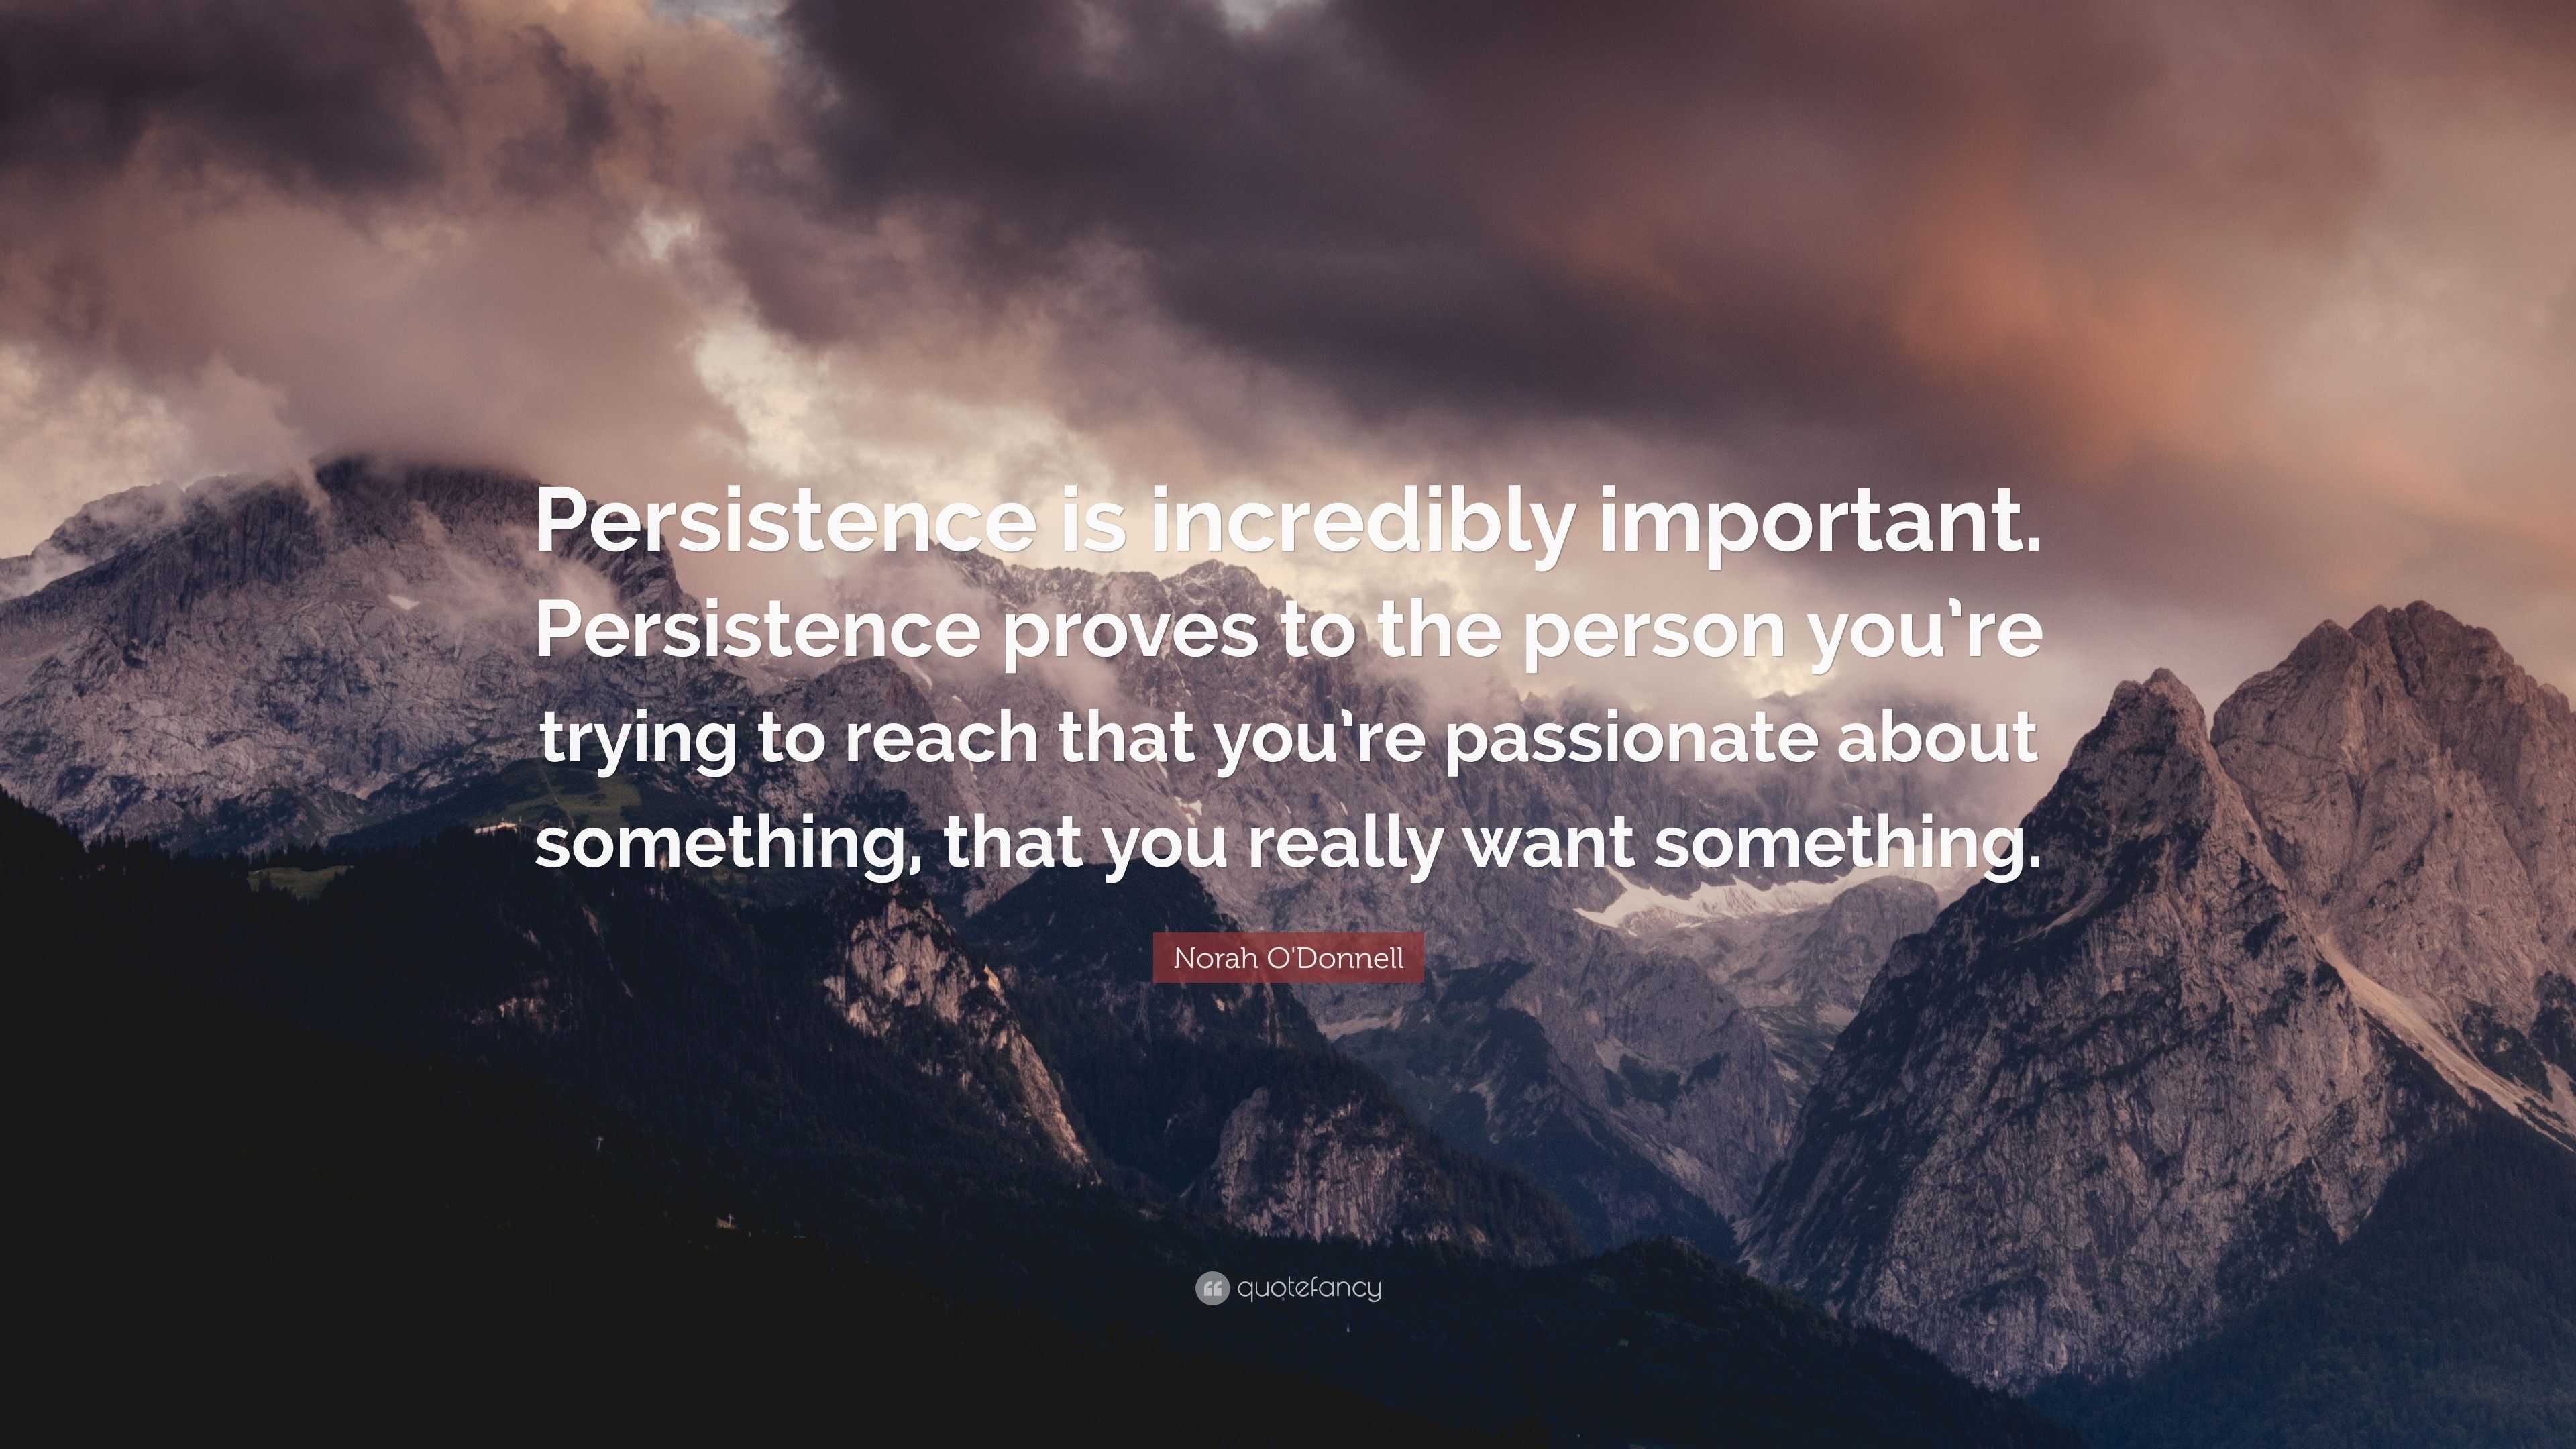 Norah O'Donnell Quote: “Persistence is incredibly important ...